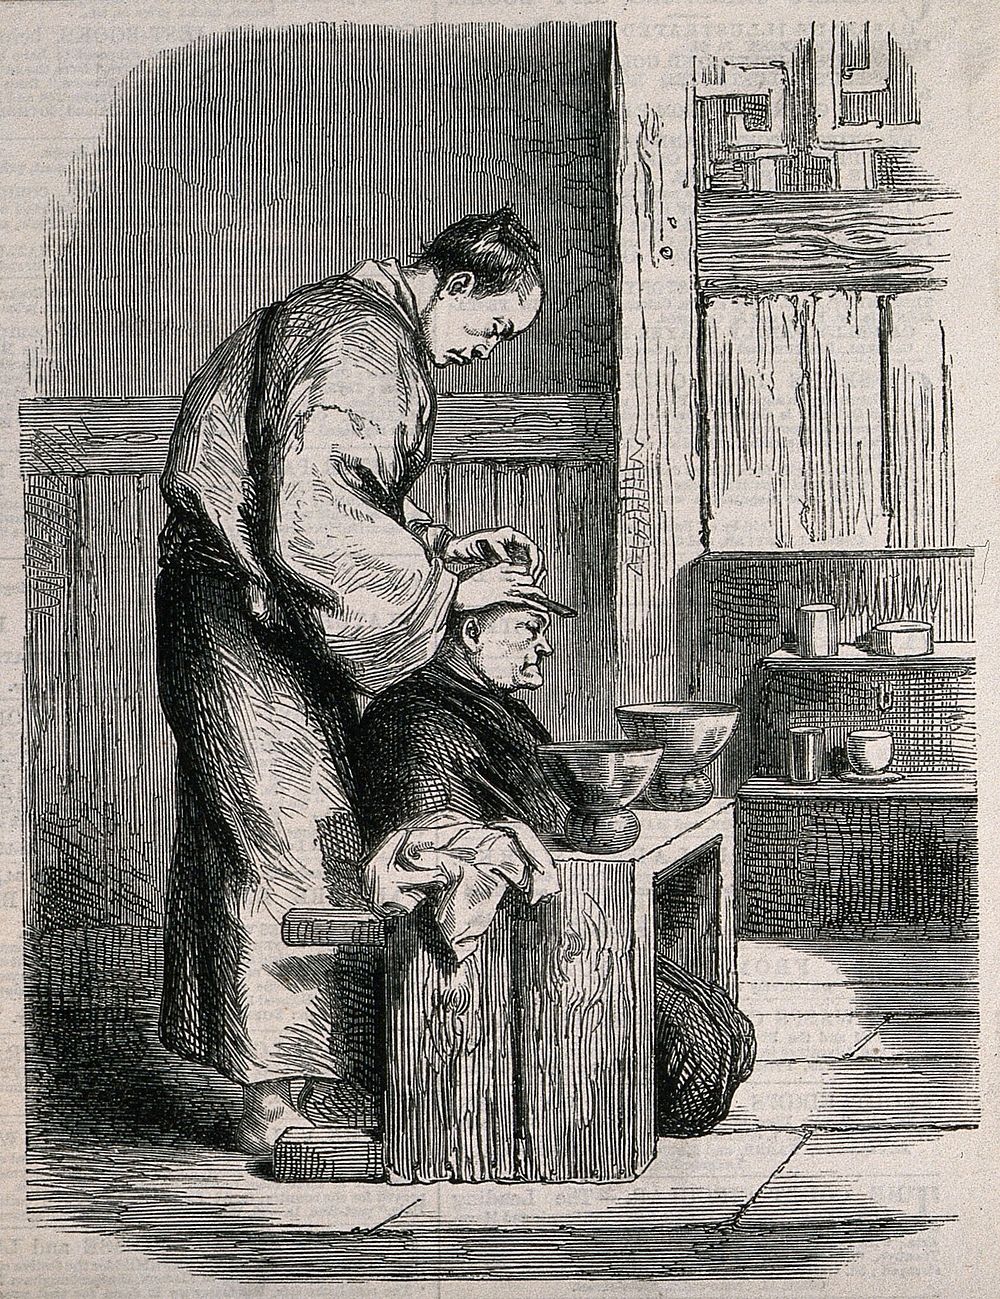 A barber dressing a seated man's hair. Wood engraving.